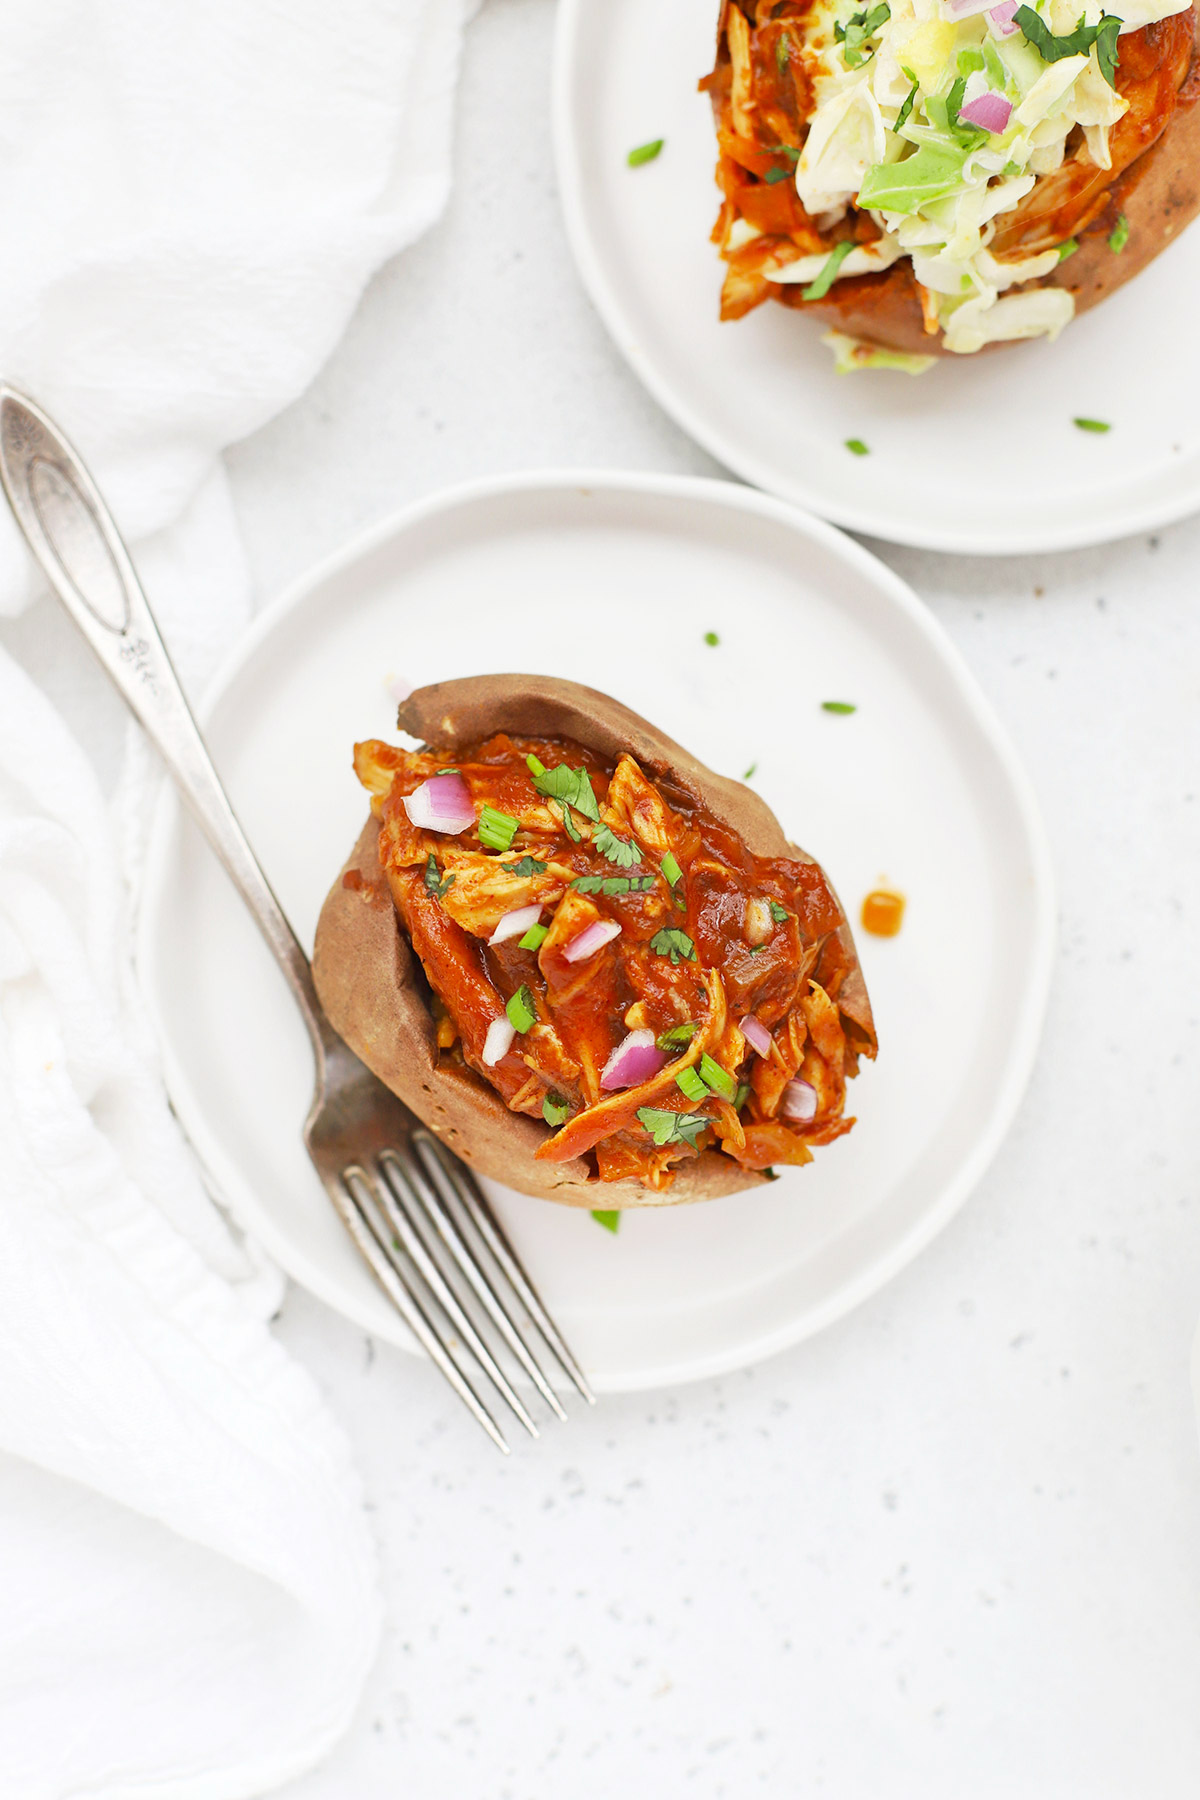 Overhead view of a BBQ Chicken Stuffed Baked Sweet Potato on a white plate